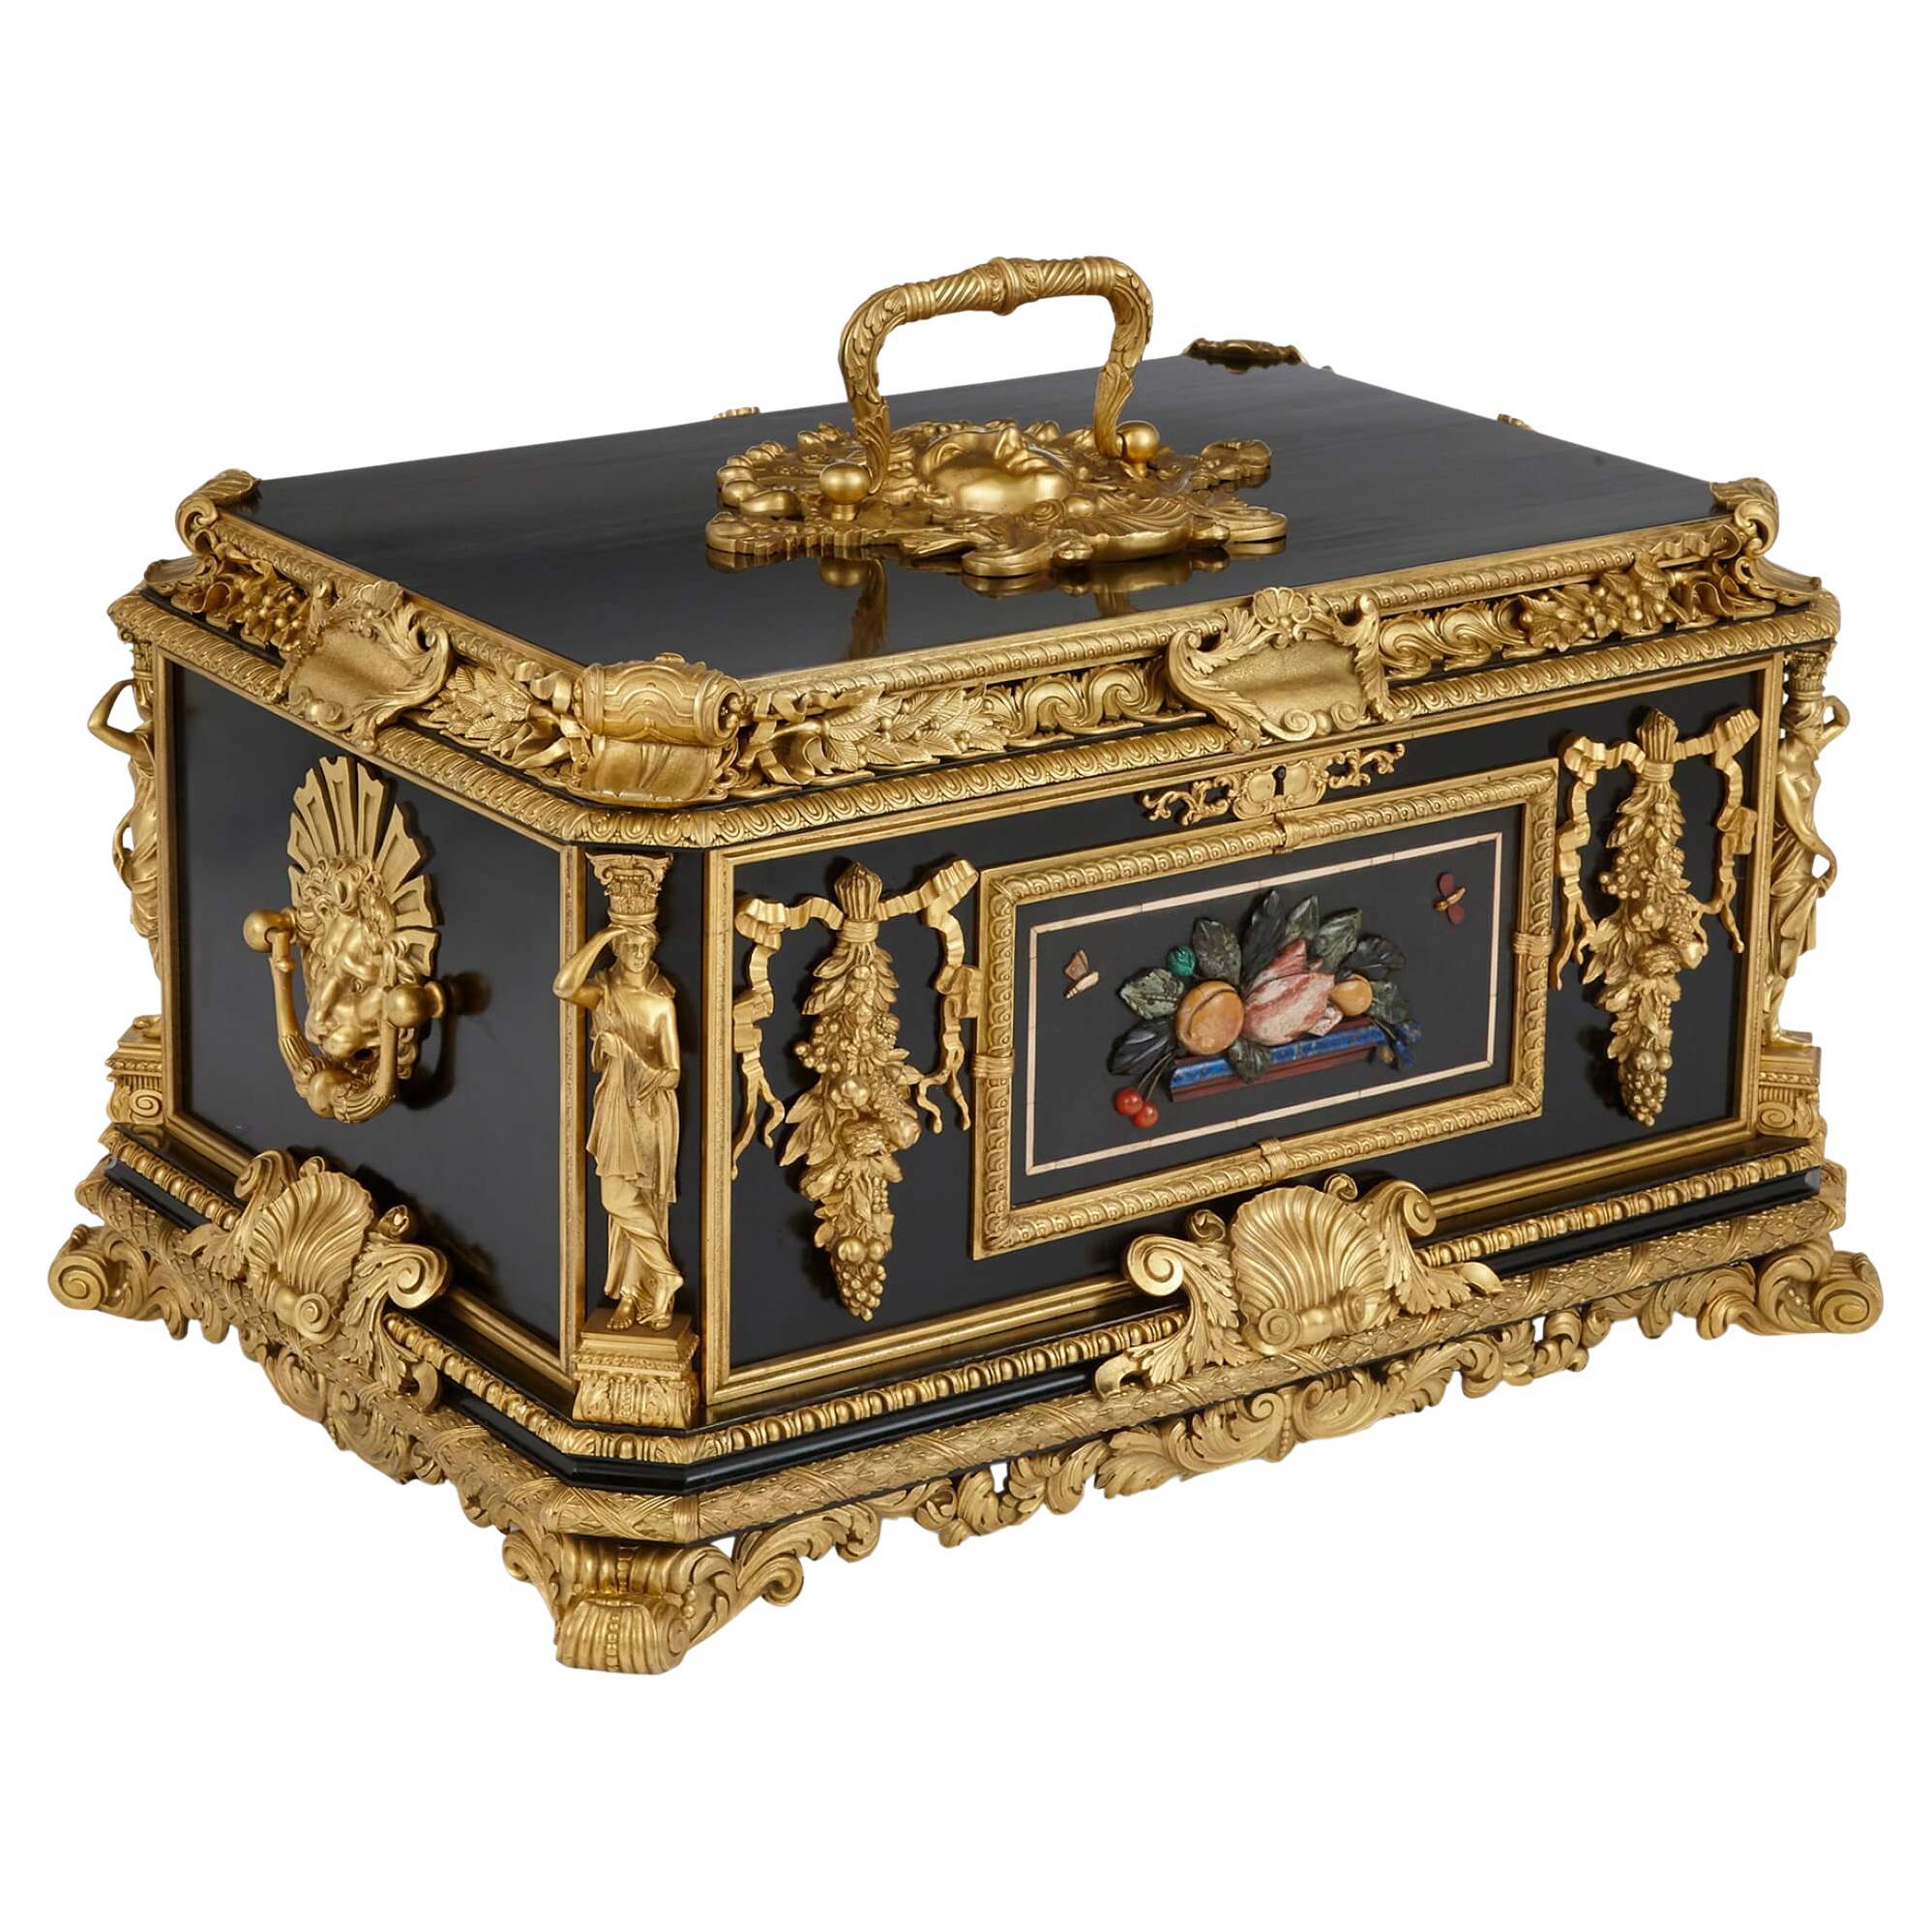 Magnificent and large ormolu and hardstone Regency period ebonized wooden casket For Sale